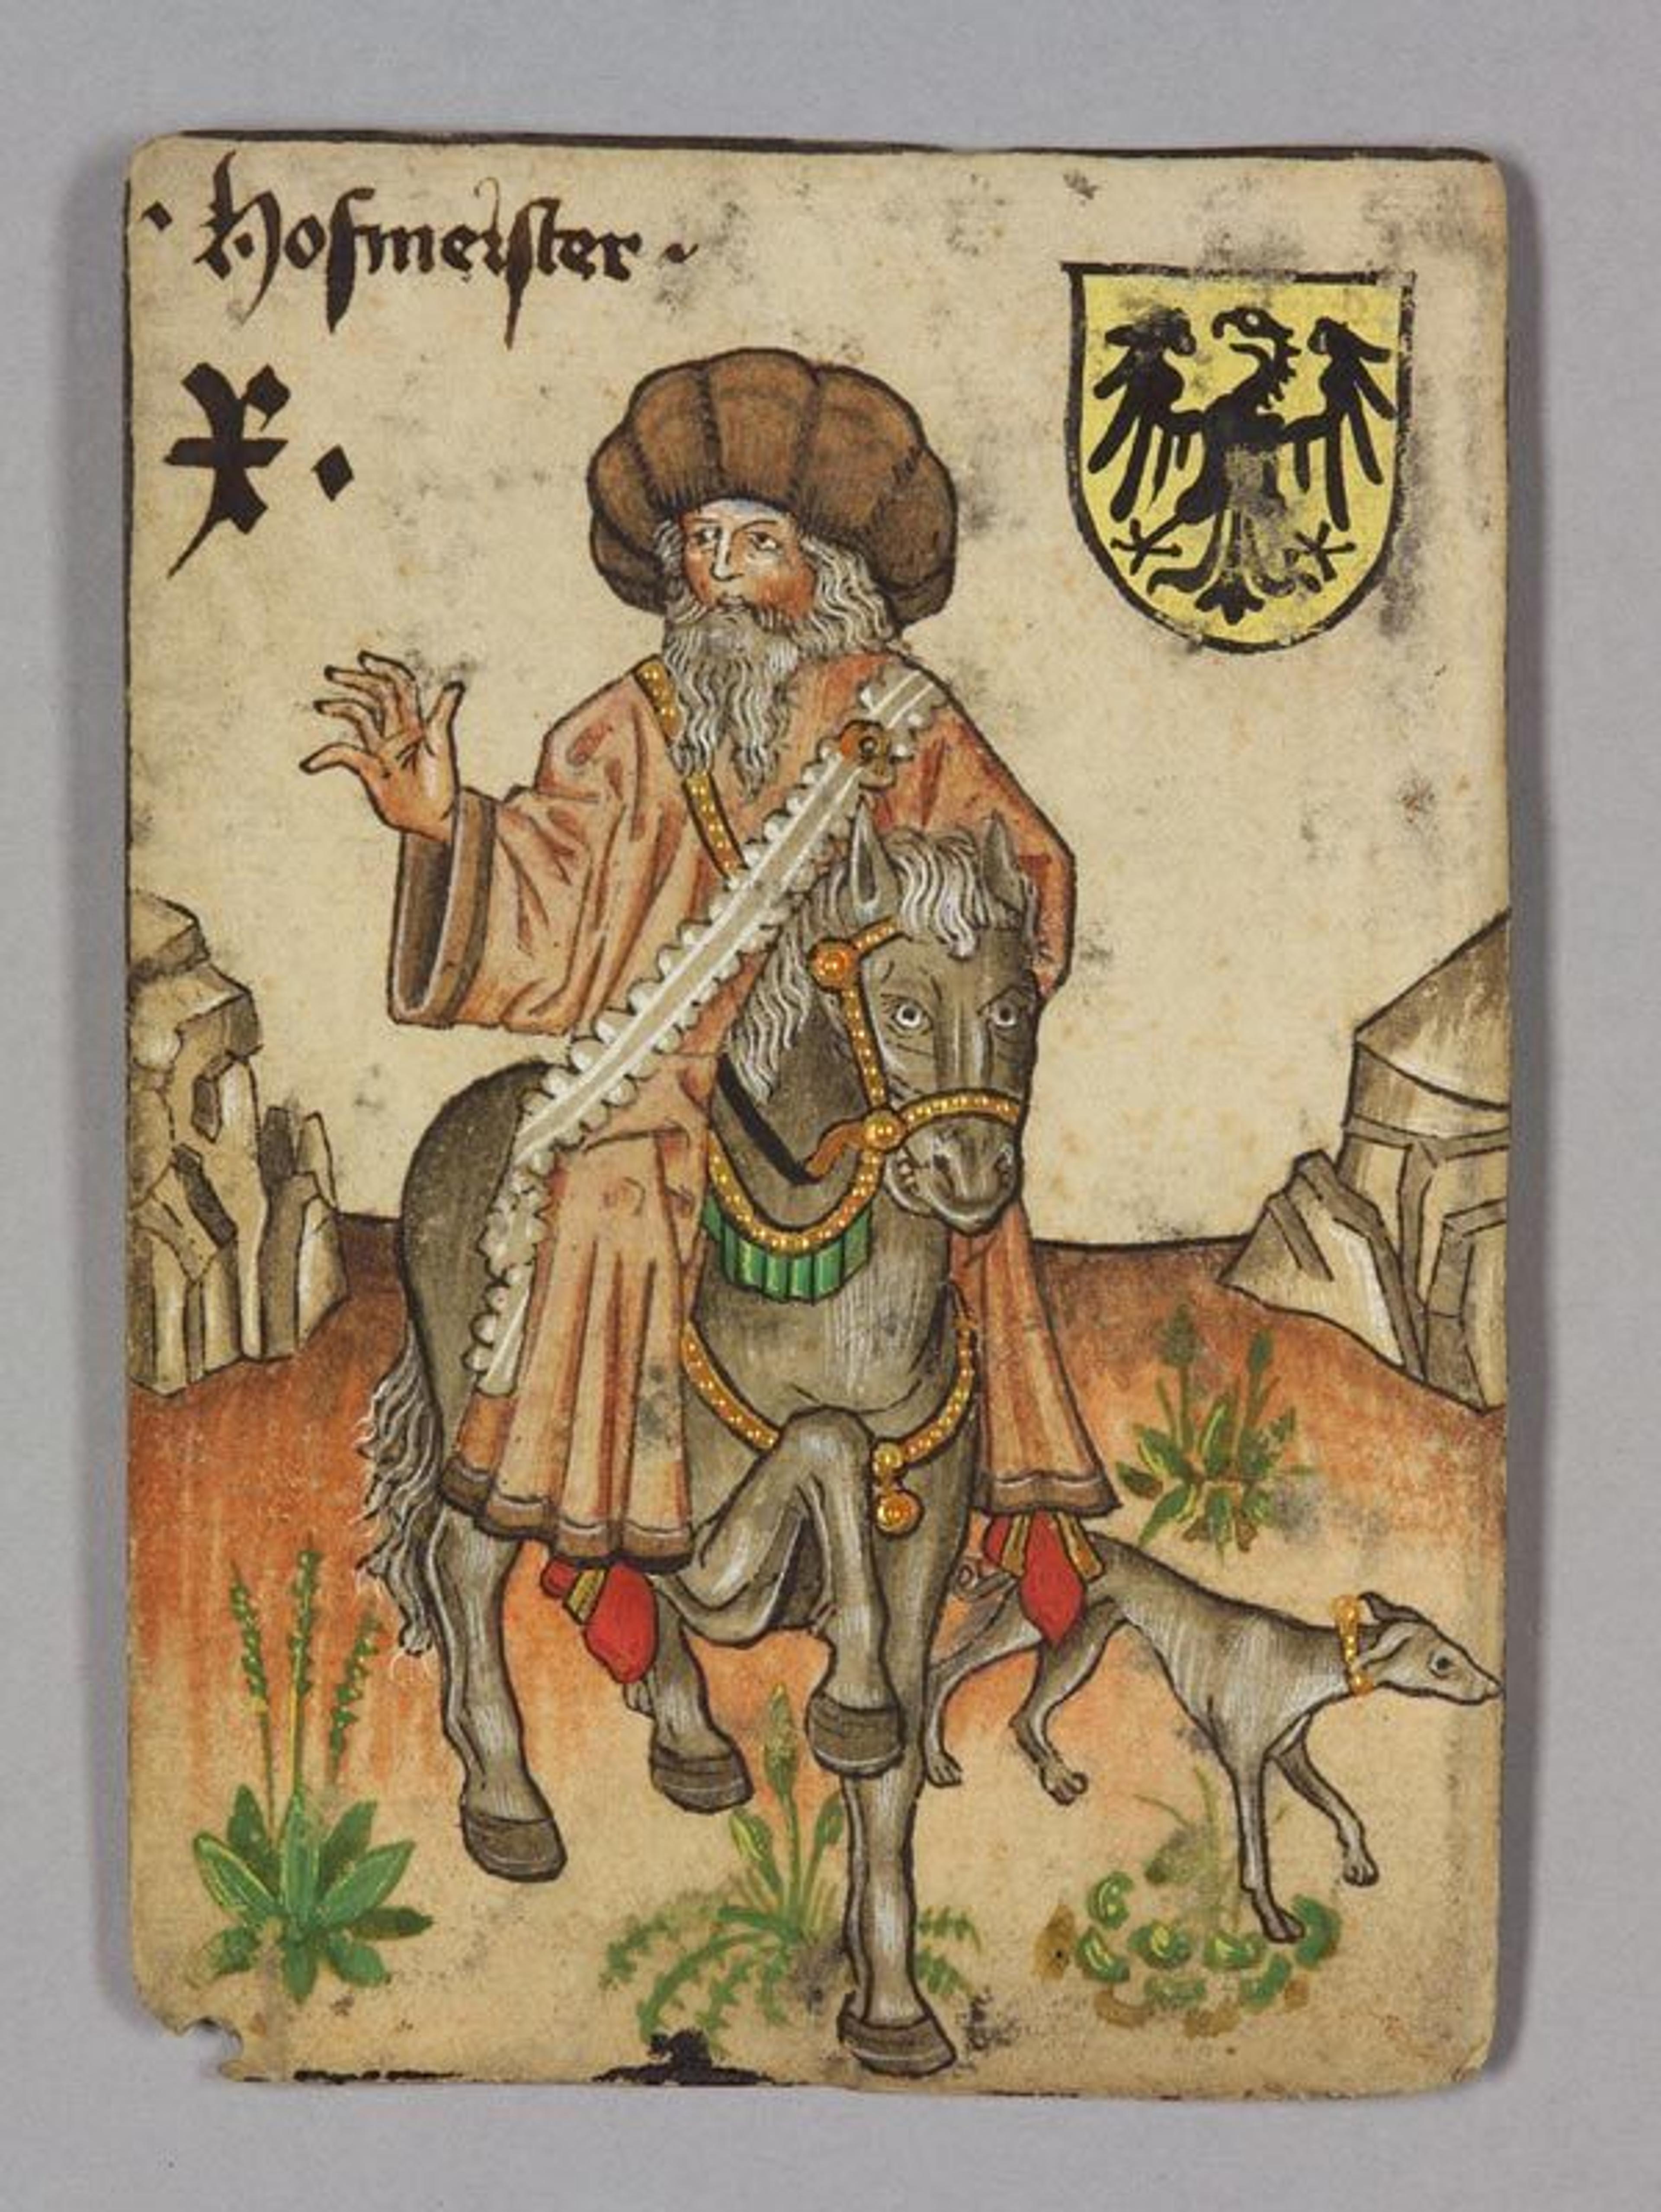 10 of Germany, Master of the Household. The Courtly Household Cards. 